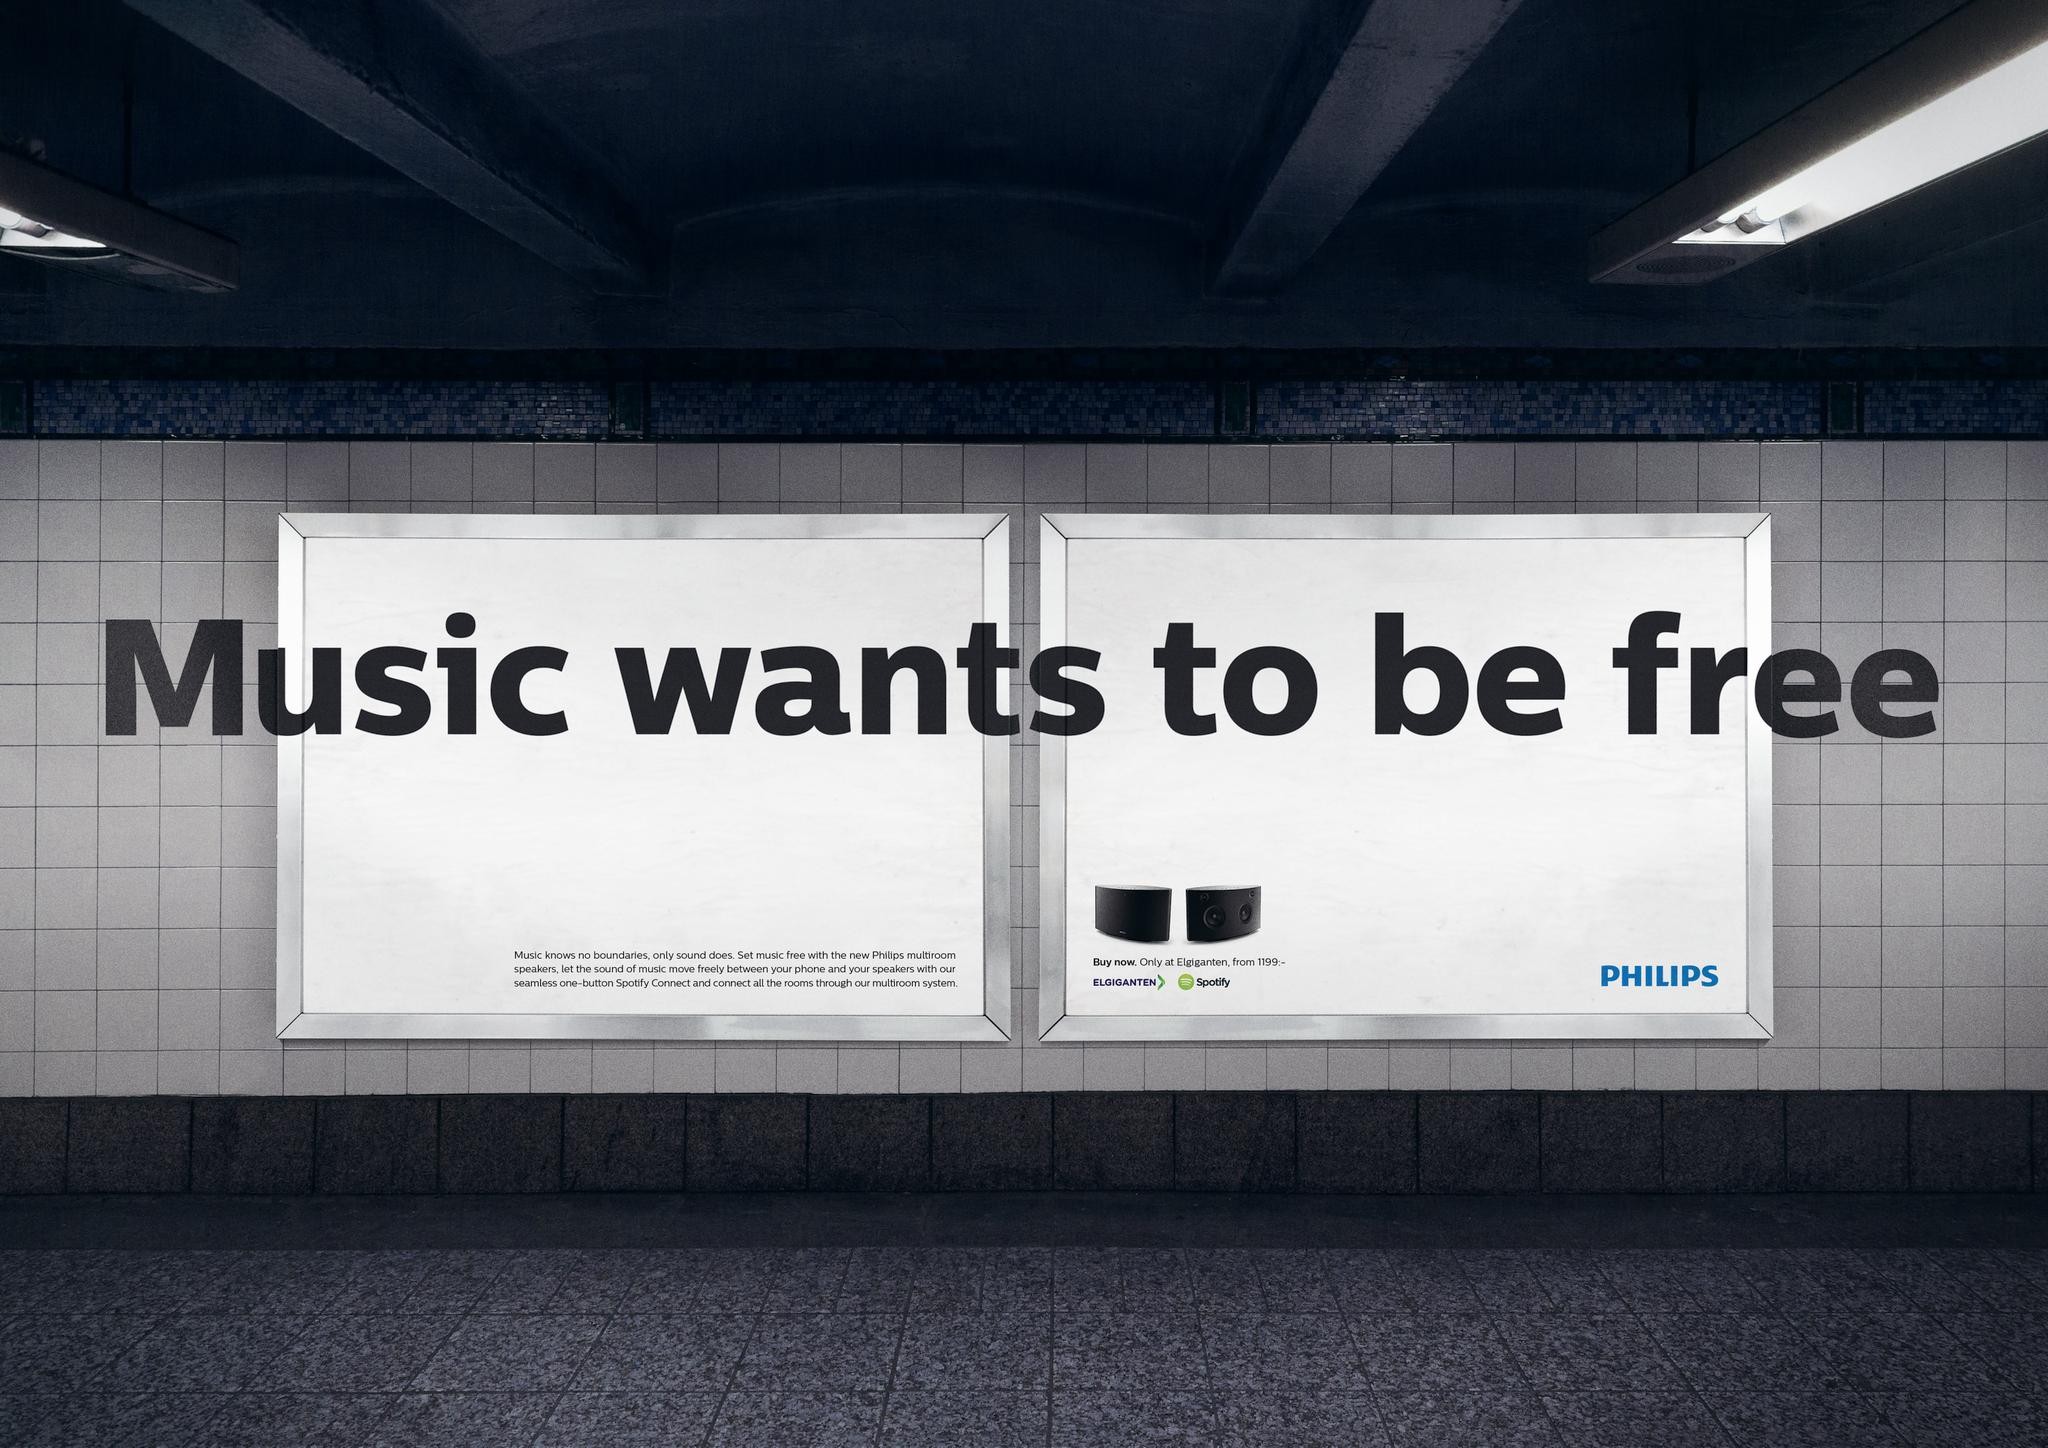 MUSIC WANTS TO BE FREE